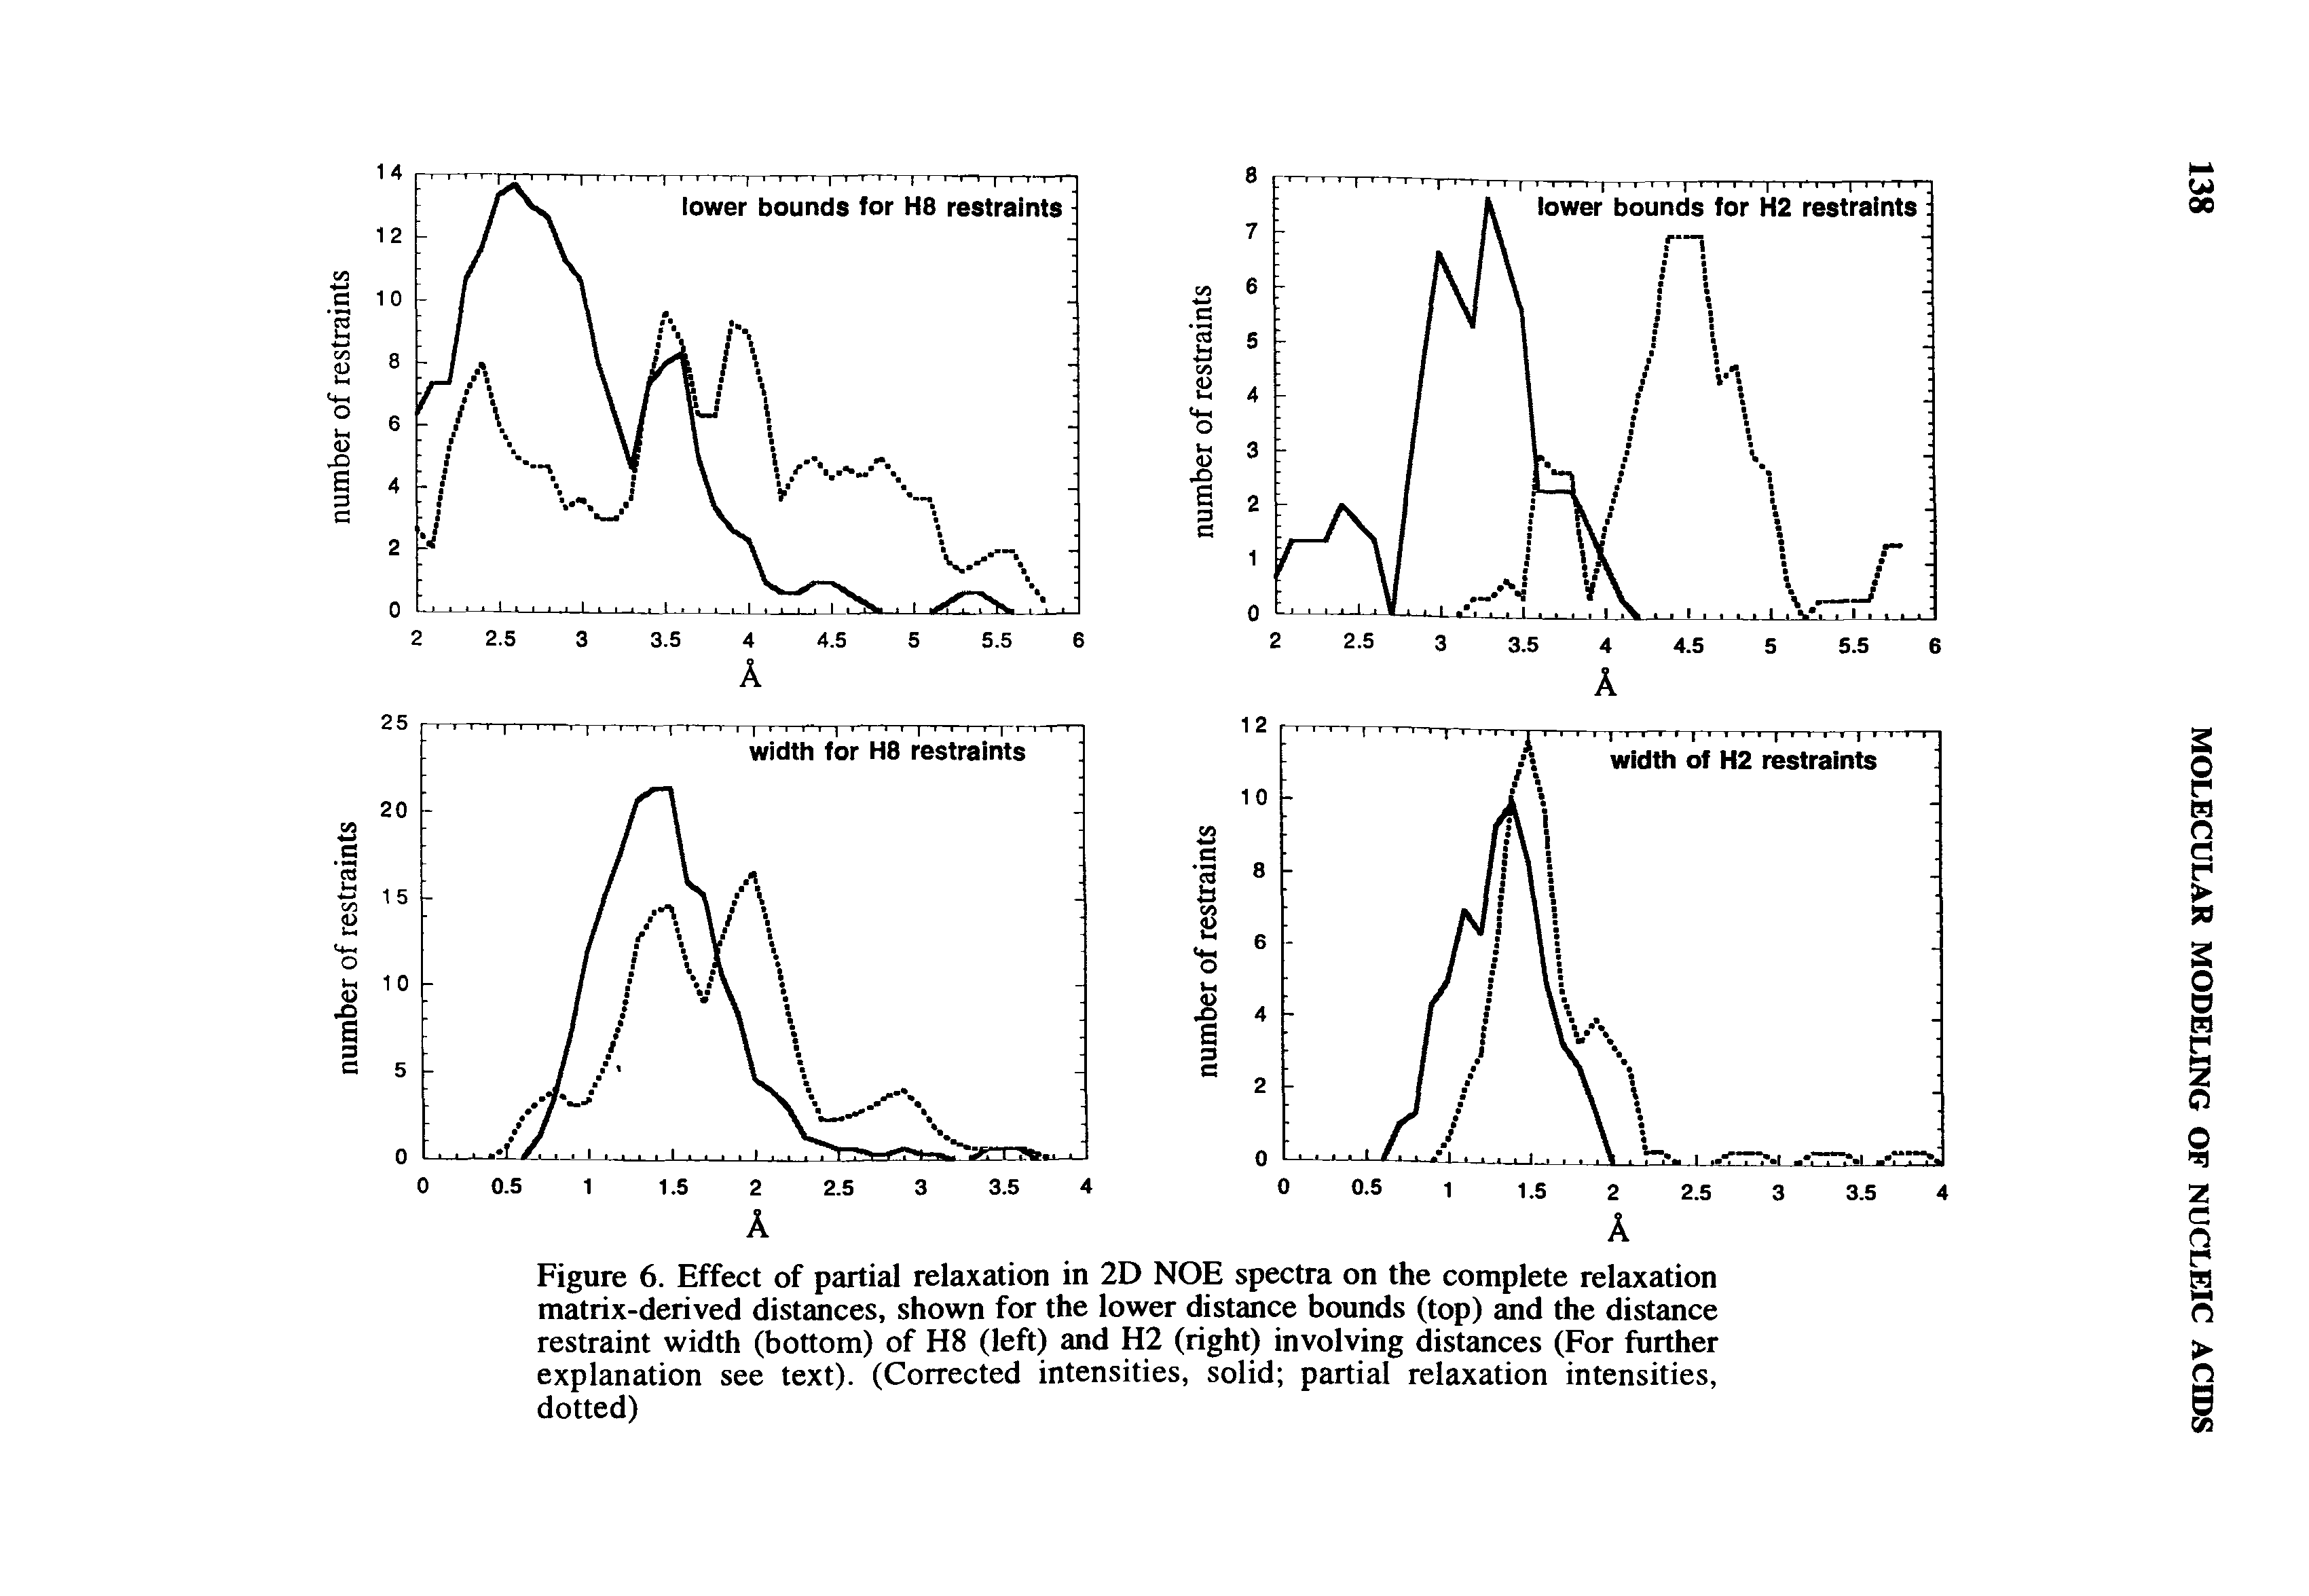 Figure 6. Effect of partial relaxation in 2D NOE spectra on the complete relaxation matrix-derived distances, shown for the lower distance bounds (top) and the distance restraint width (bottom) of H8 (left) and H2 (right) involving distances (For further explanation see text). (Corrected intensities, solid partial relaxation intensities, dotted)...